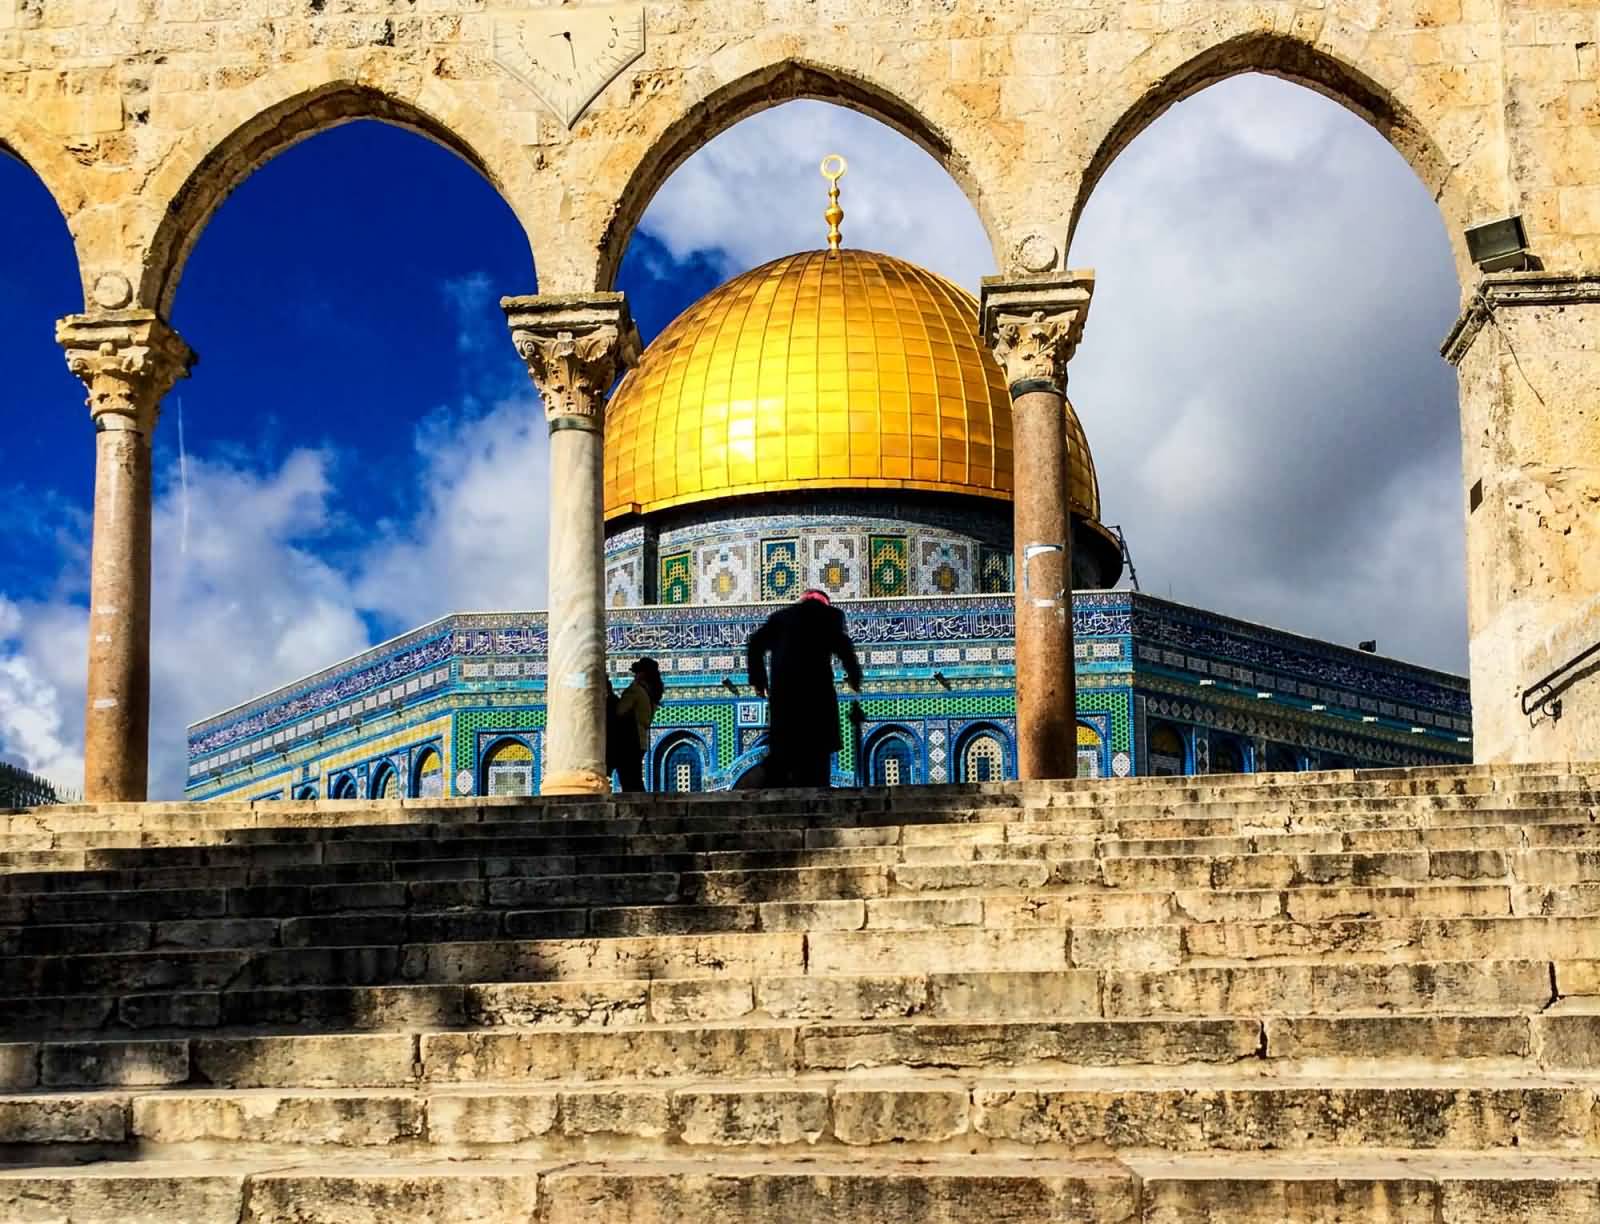 Southwestern View Of The Dome Of The Rock